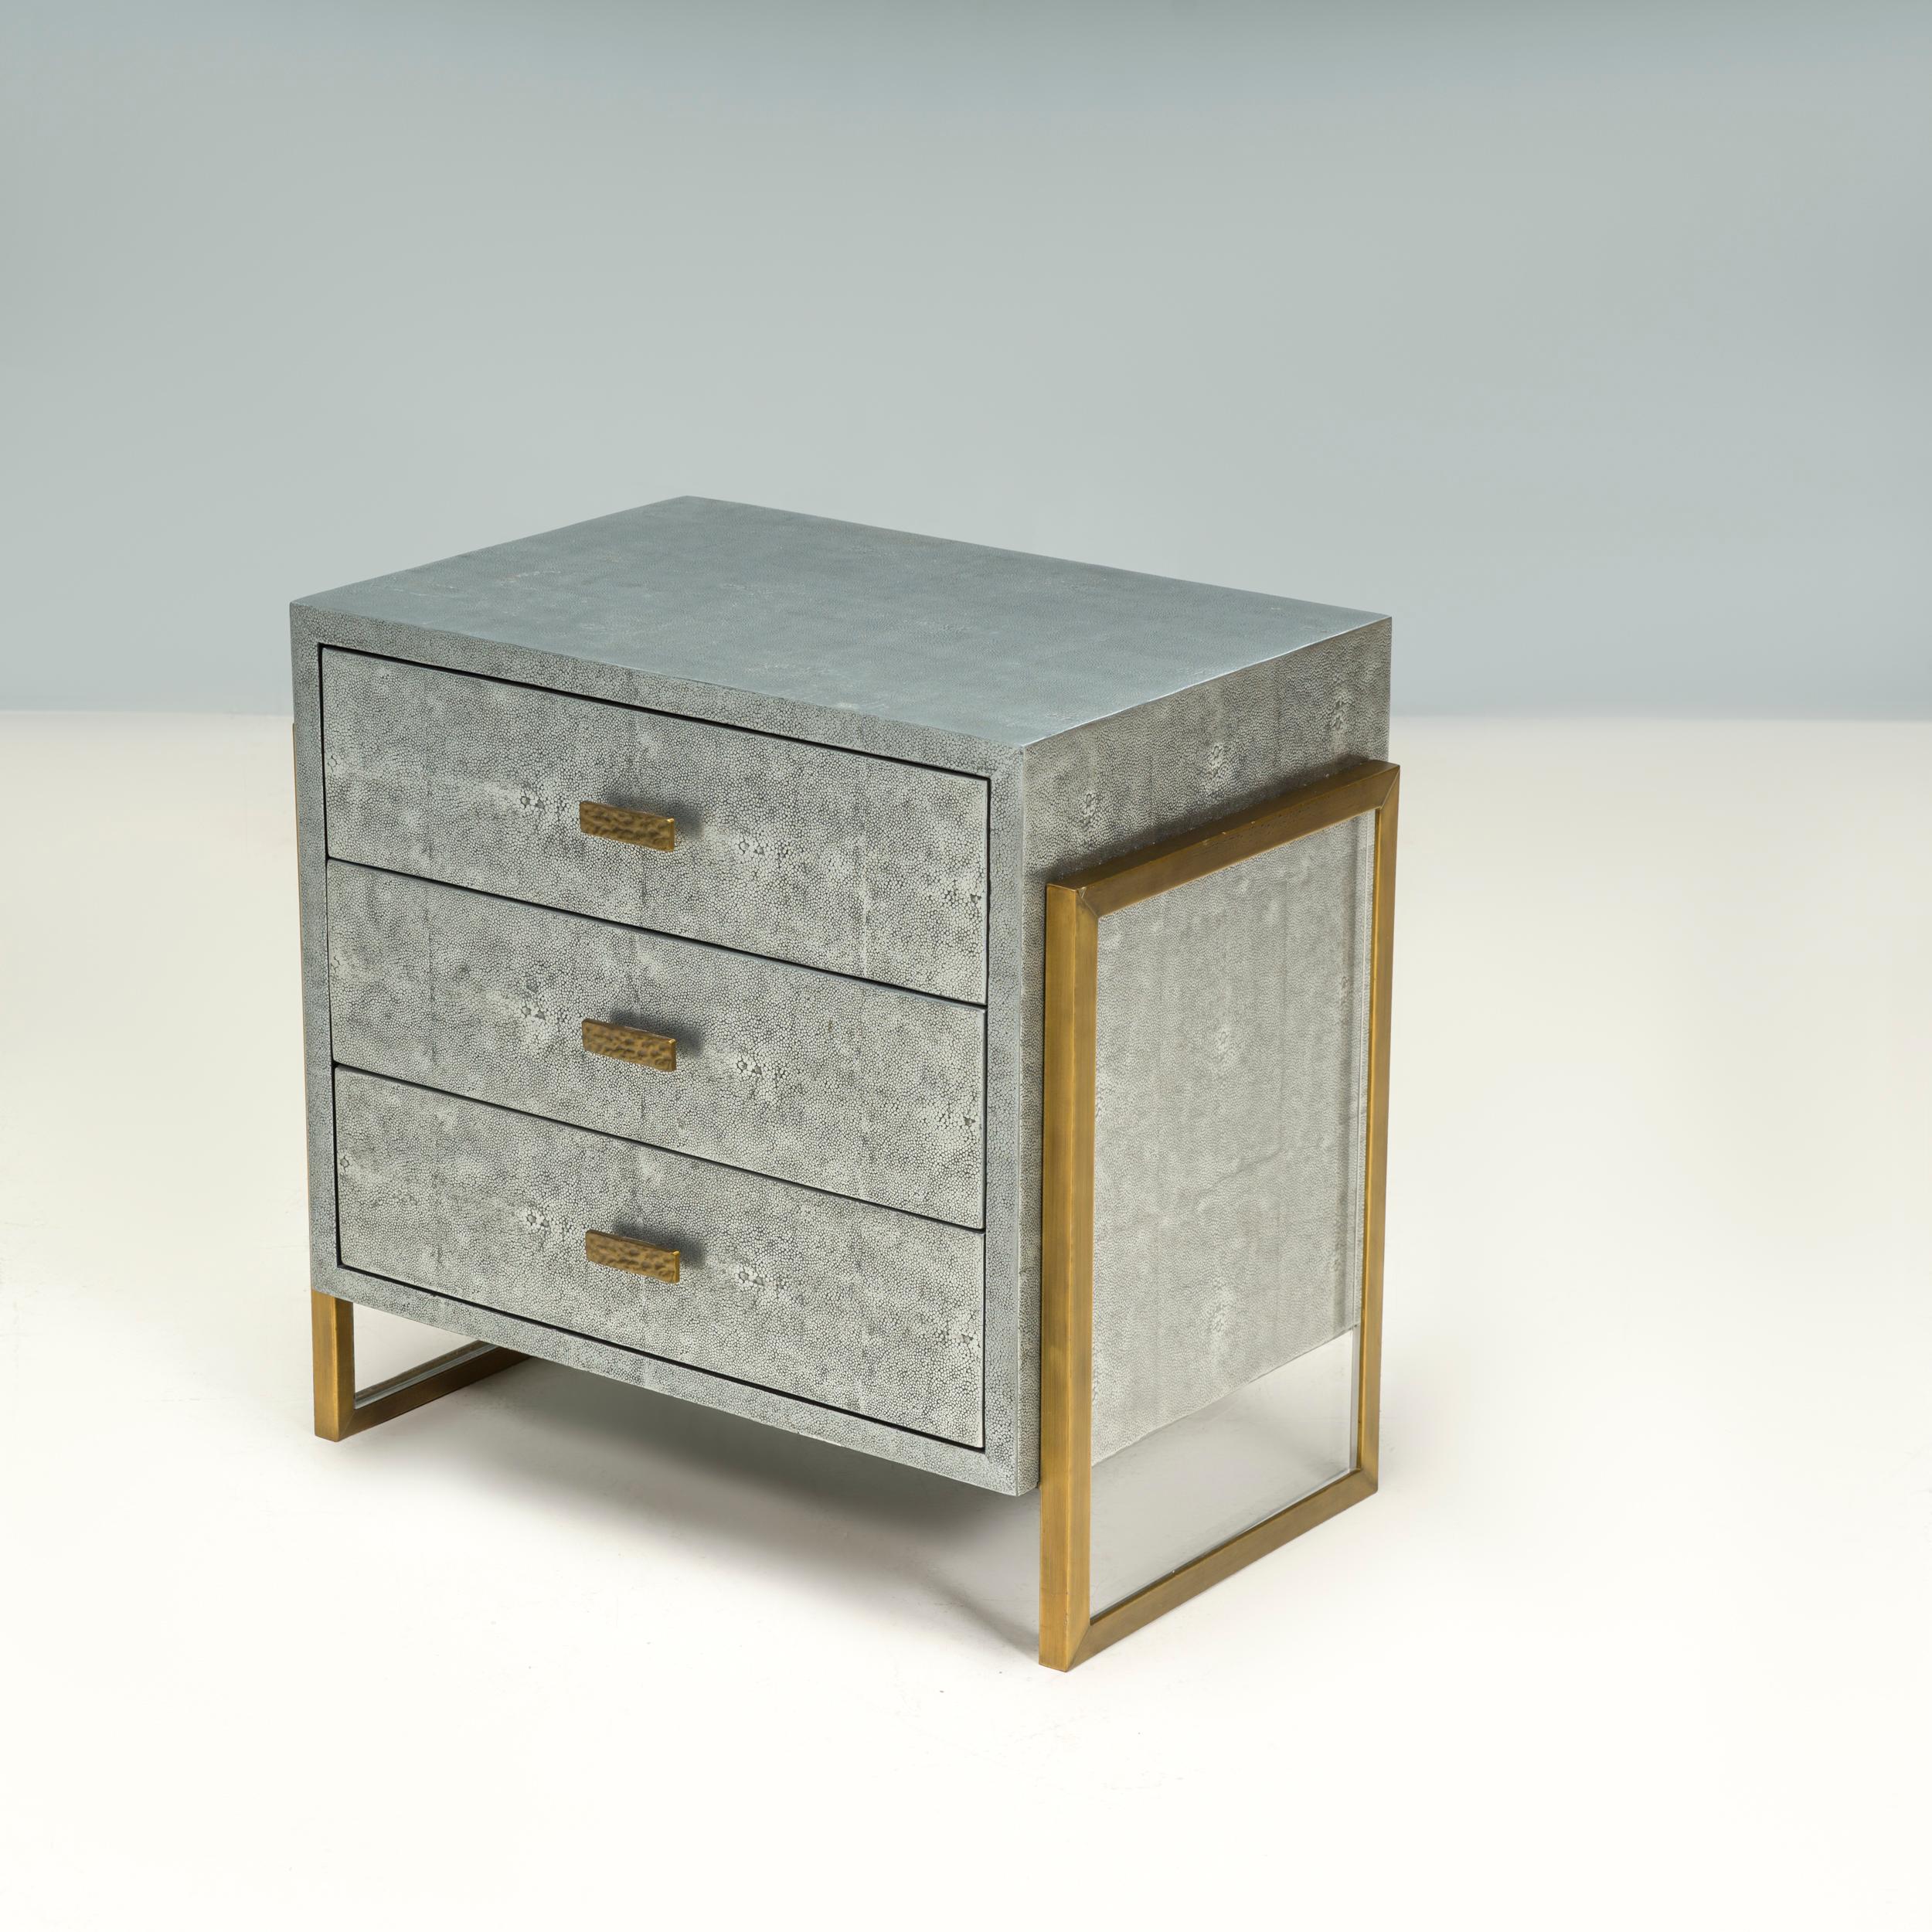 Julian Chichester founded his furniture design company in 1995, inspired by the classic shapes from the 19th and 20th centuries and adding his own unique twist through contemporary finishes and details.

Inspired by 1940’s West Coast furniture